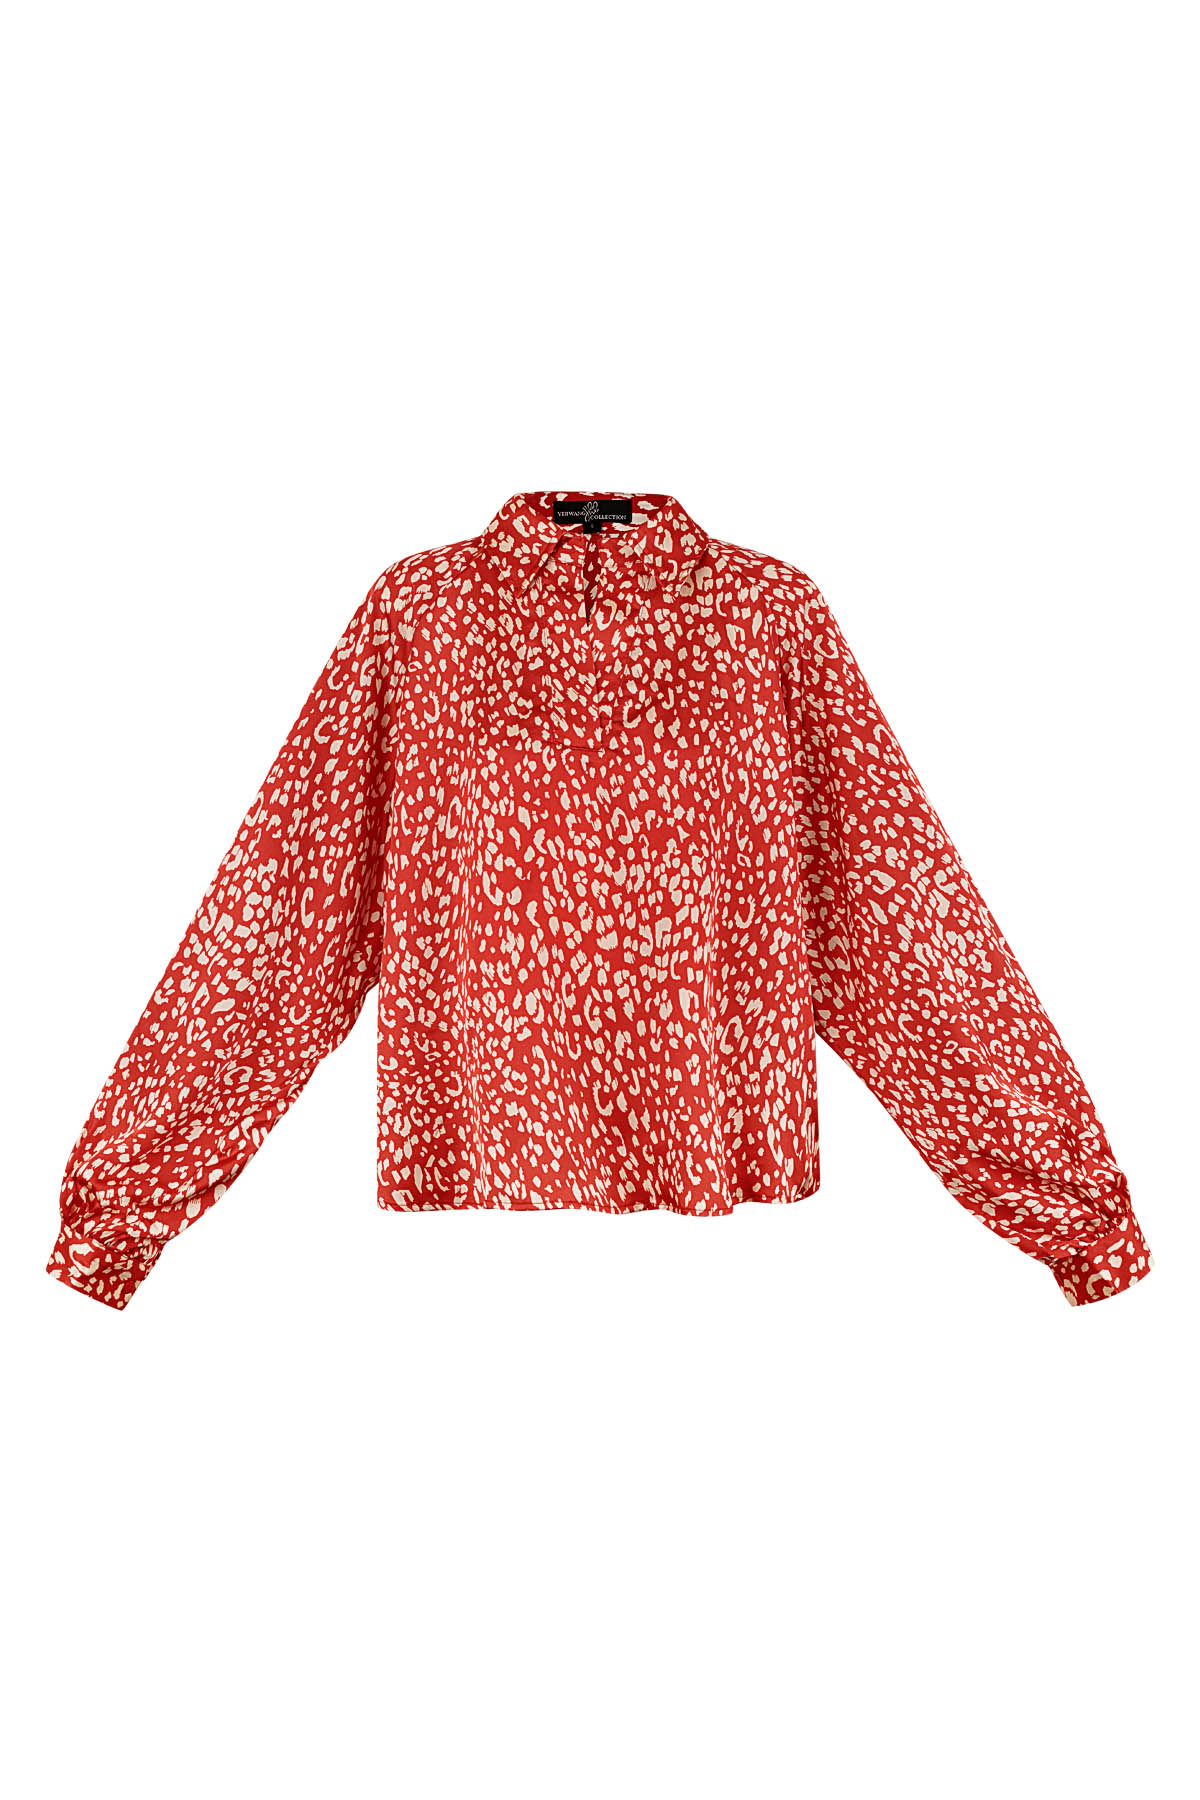 Blouse panther - red